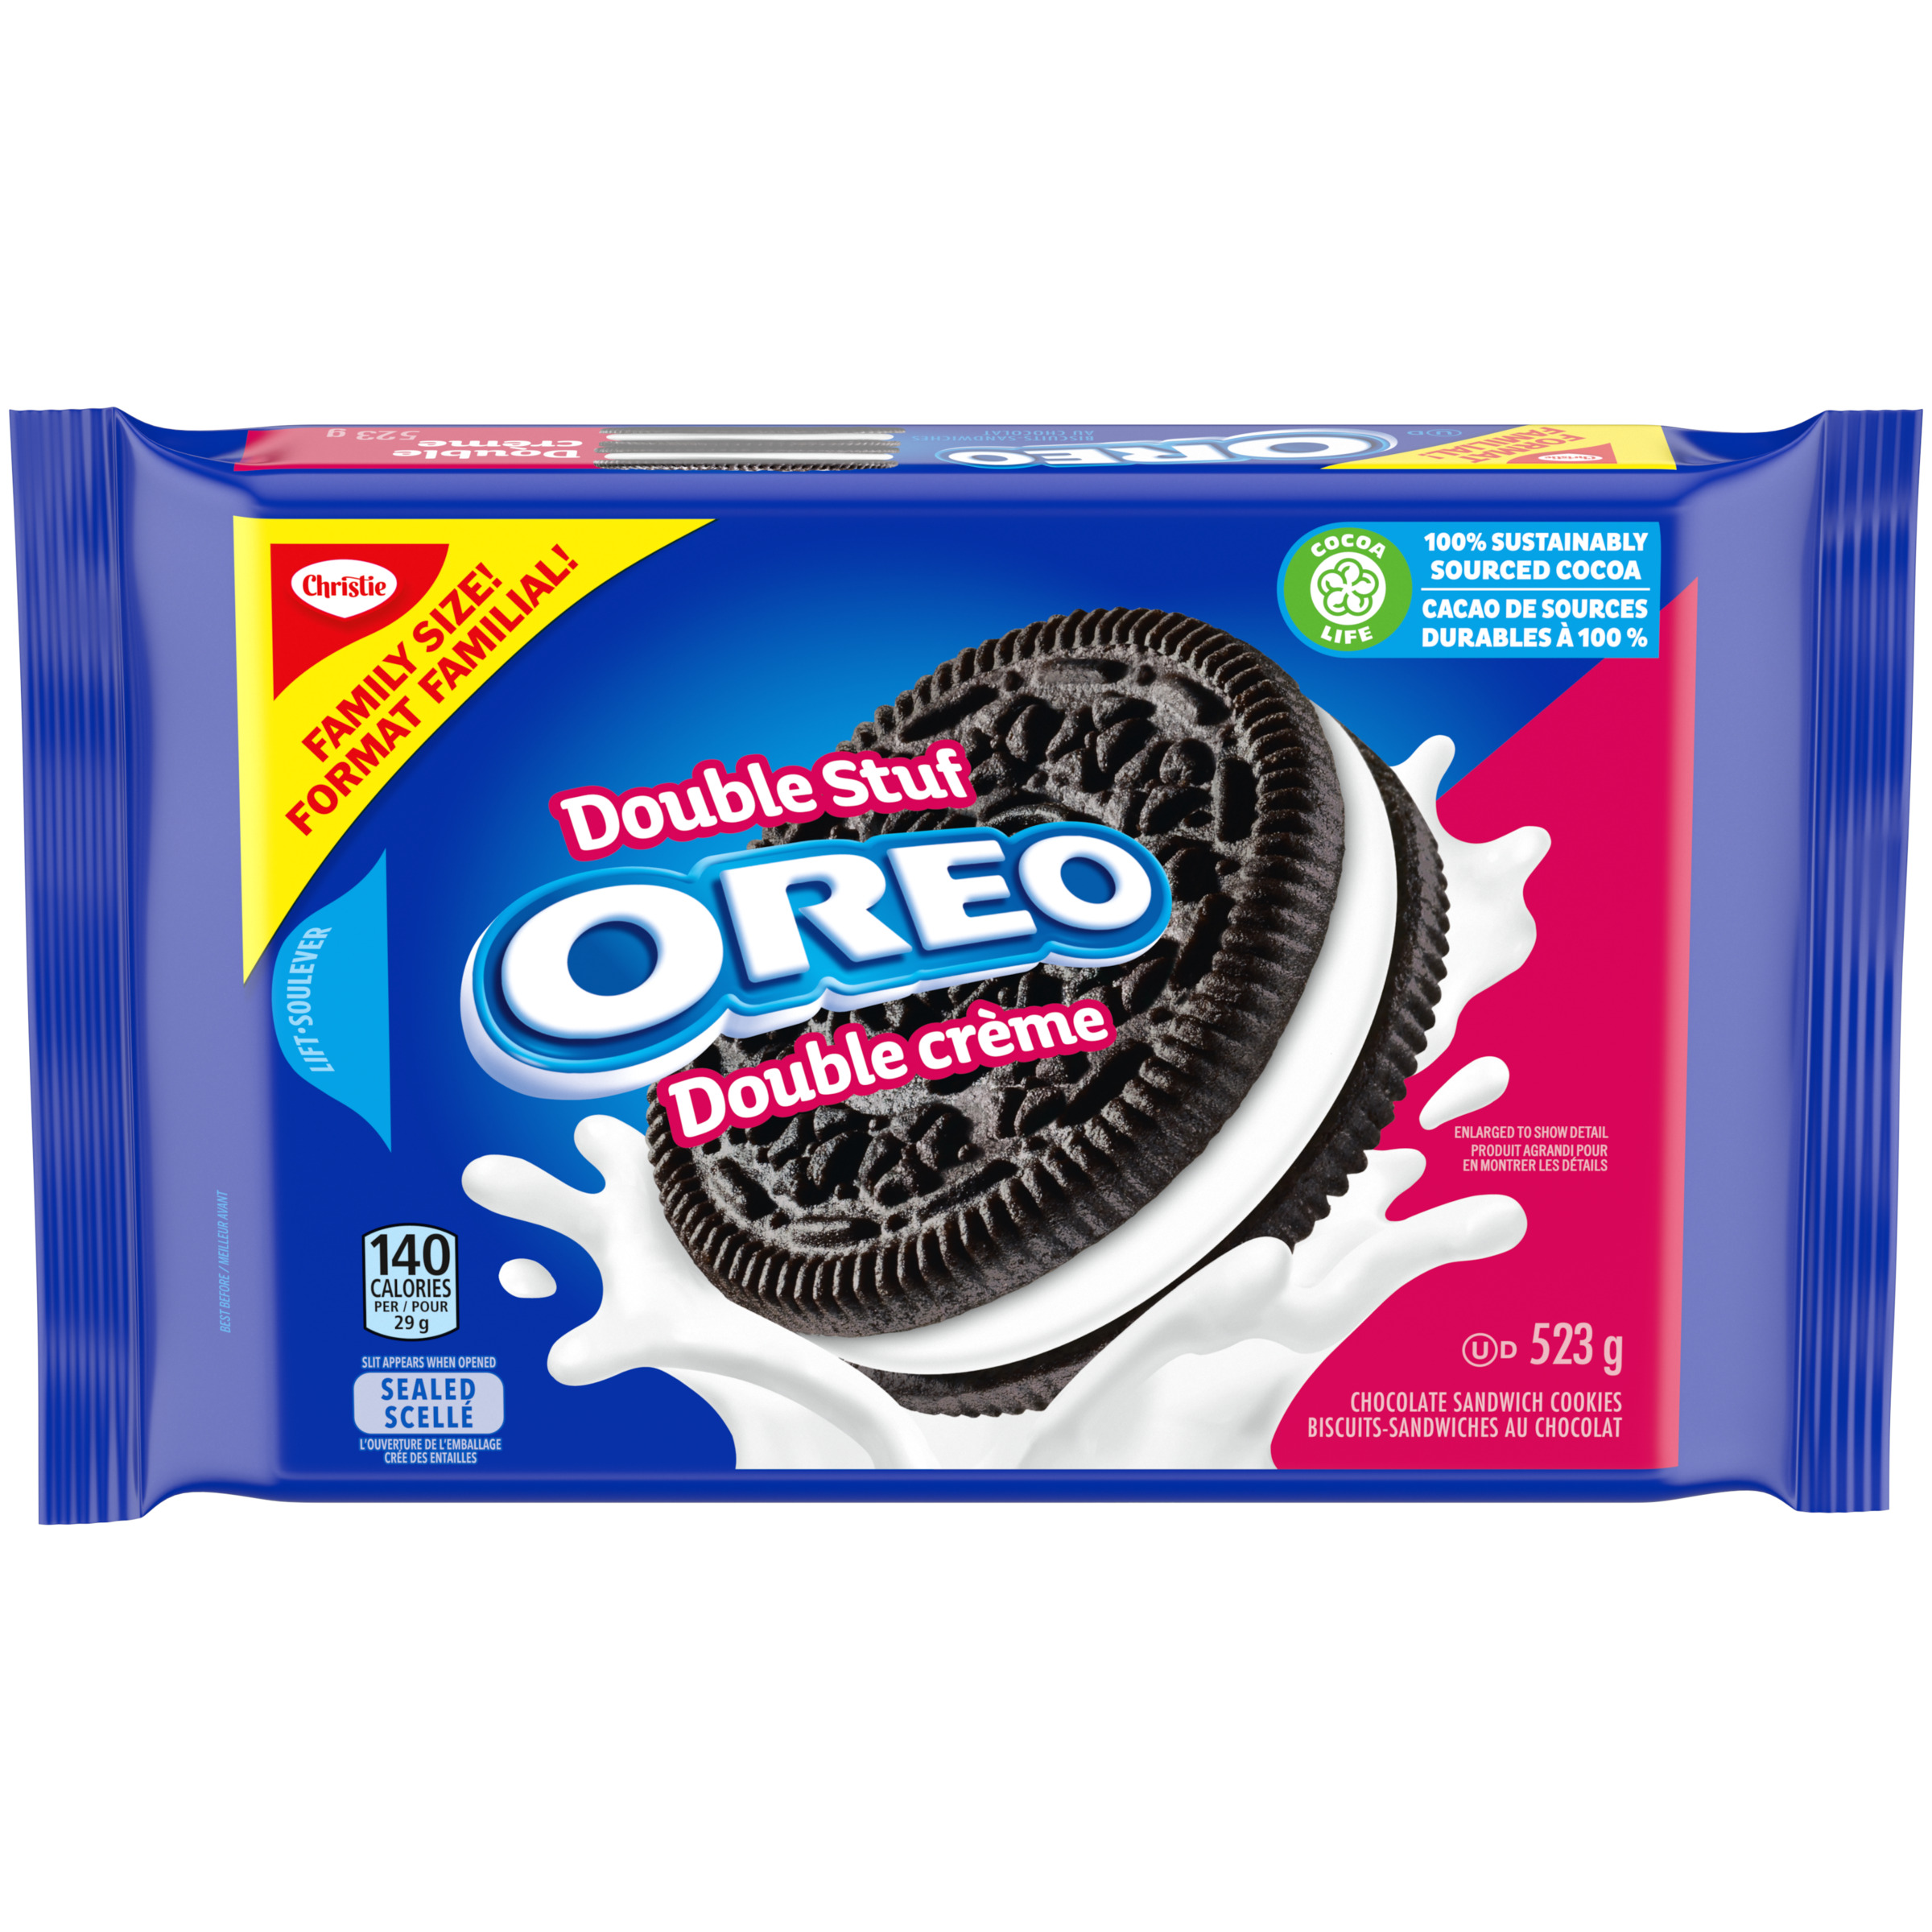 Biscuits-sandwiches OREO Double crème, 1 emballage refermable, format familial de 523 g